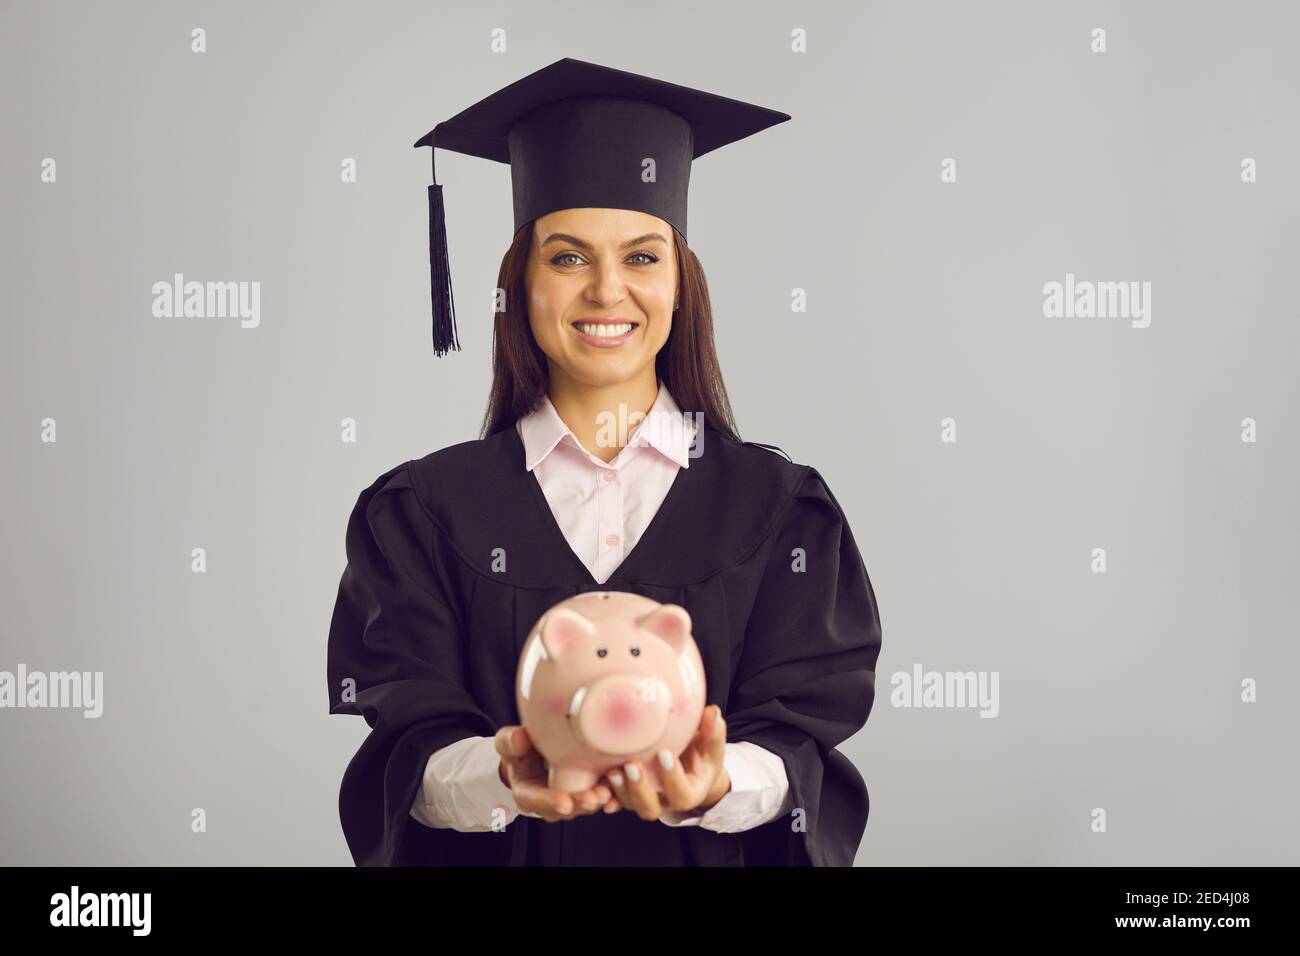 Happy student in academic cap and gown holding piggy bank with money saved for education Stock Photo